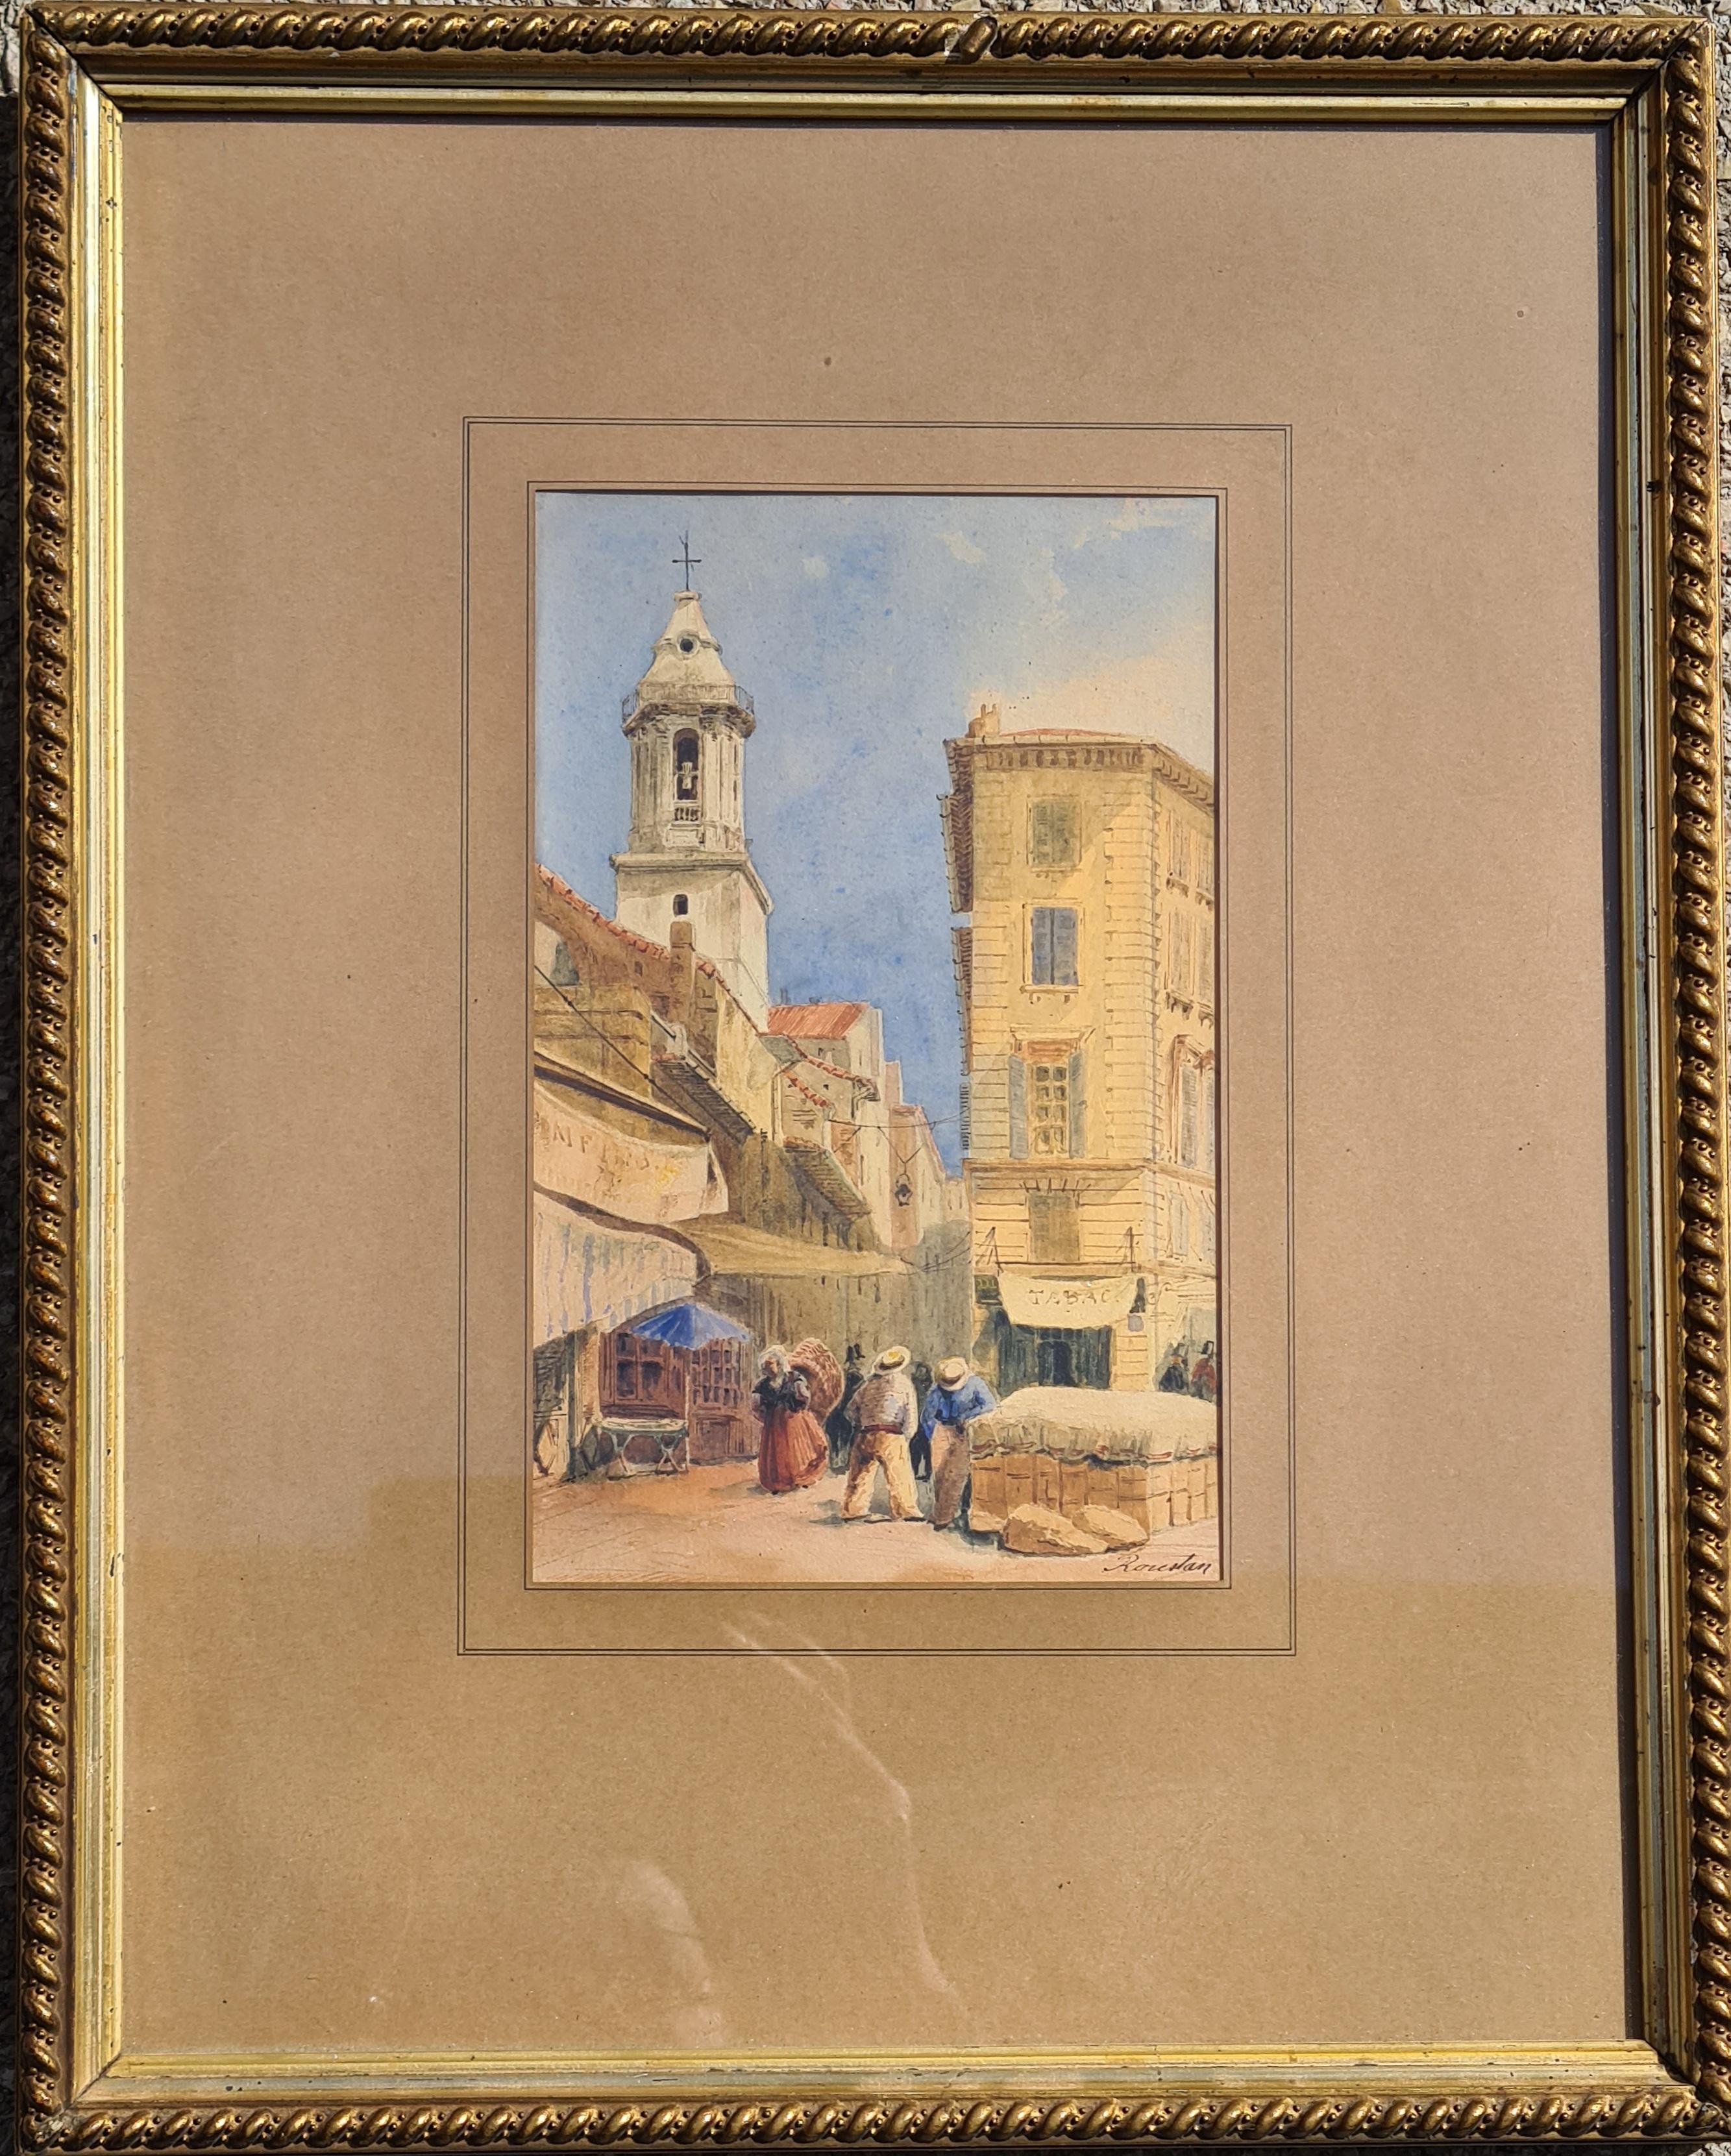 Street View of the City of Marseille and St Ferréol, Watercolour on Paper. - Brown Figurative Art by Lucien Marius Paul Roustan